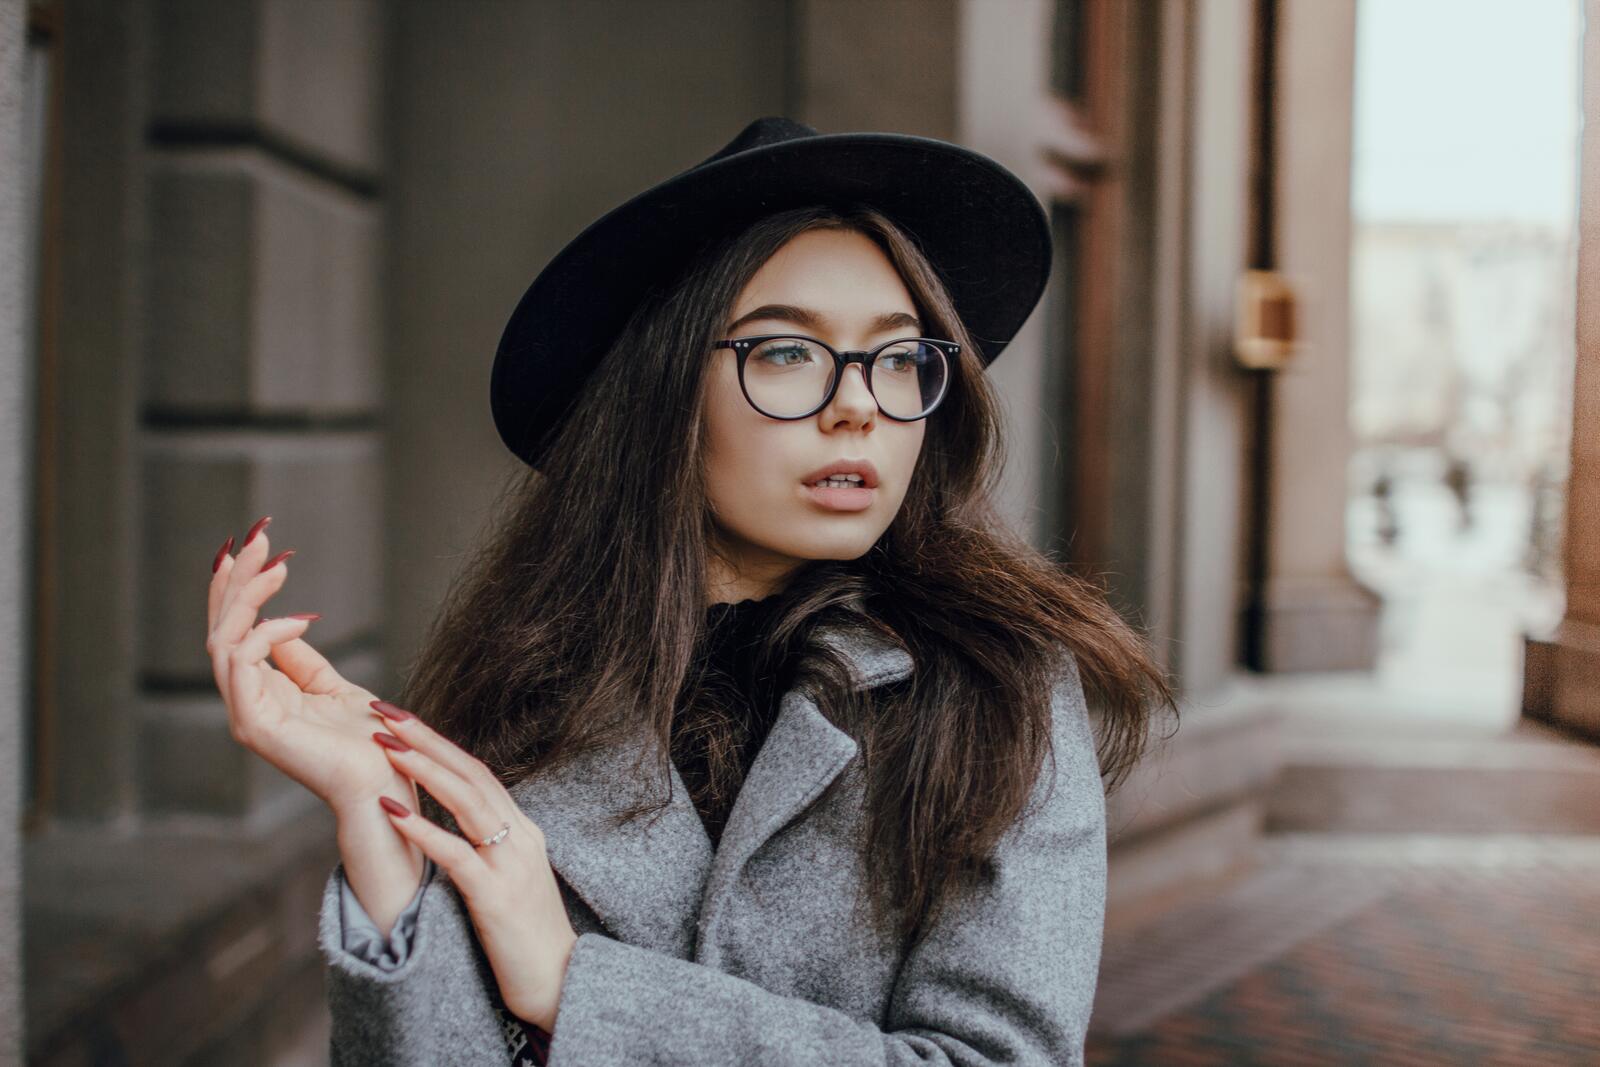 Free photo A brown-haired woman in a black hat and see-through glasses